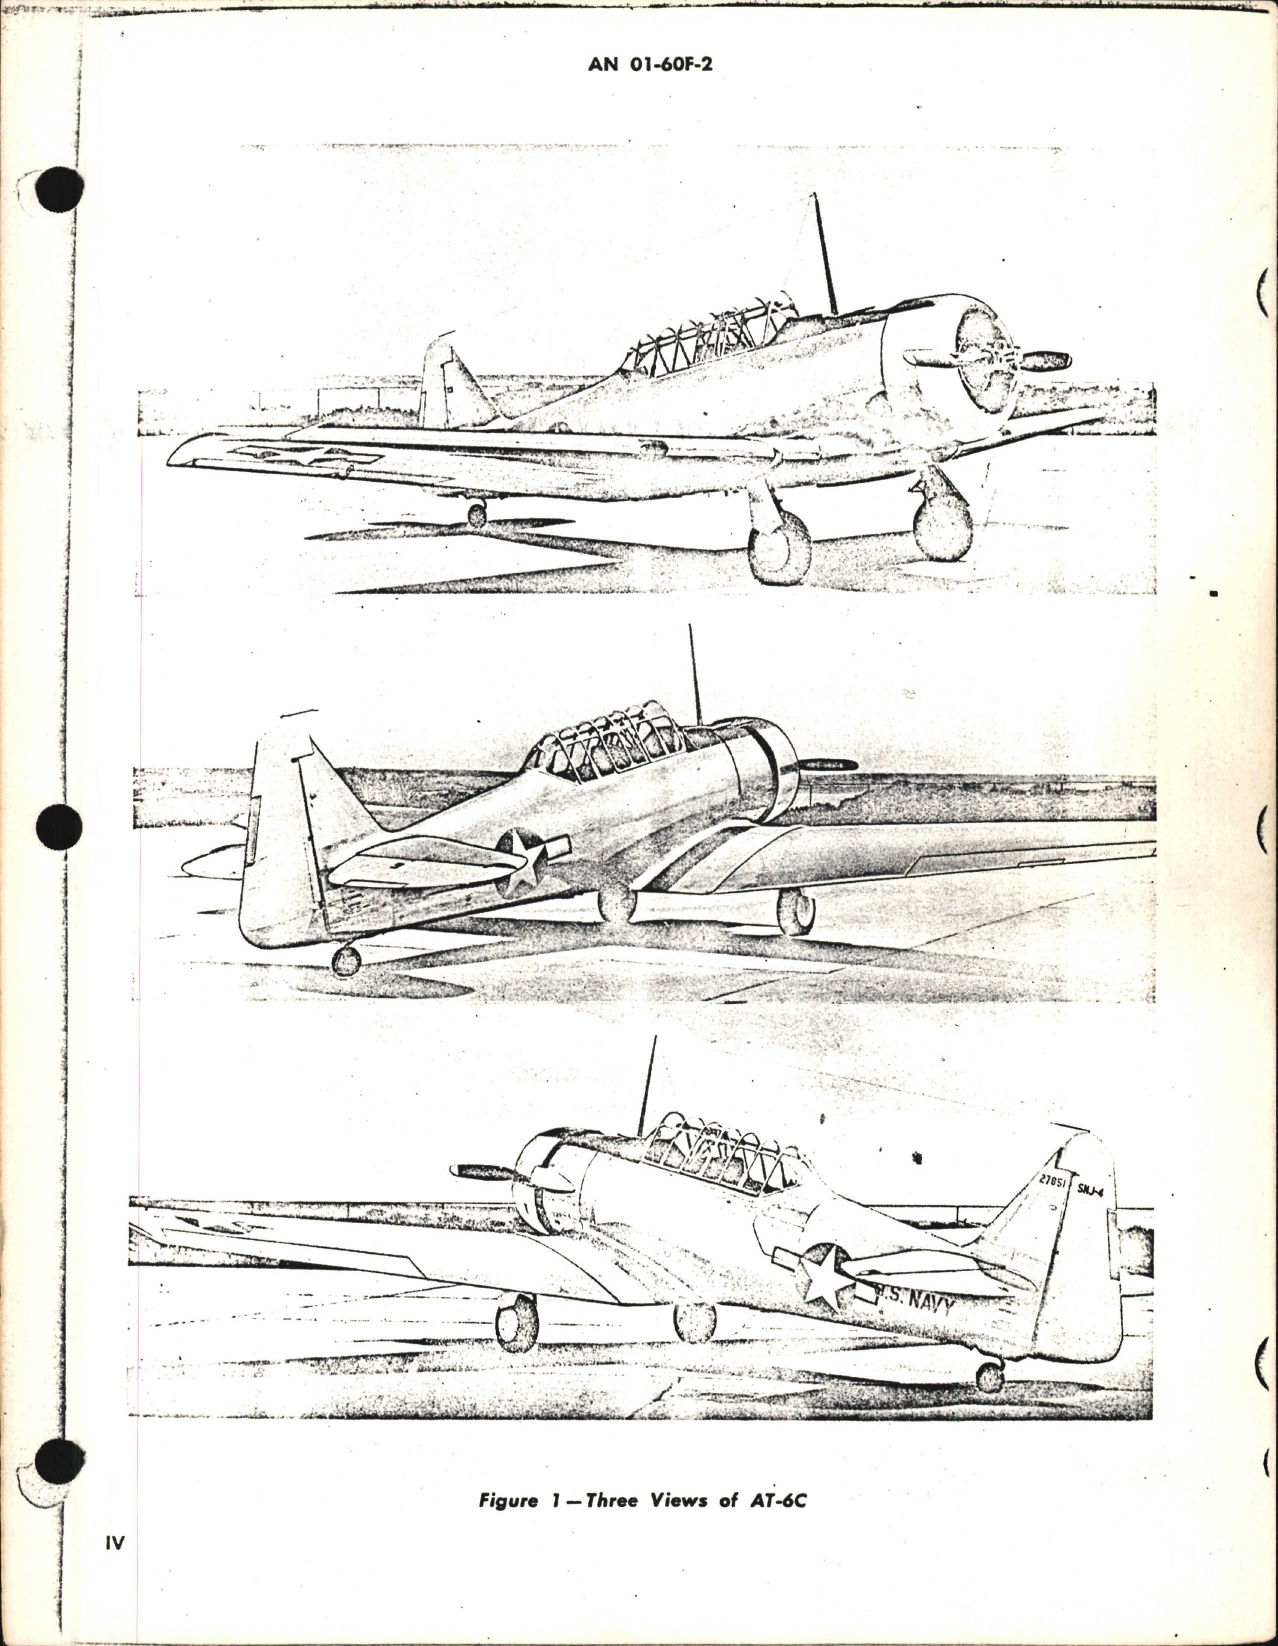 Sample page 6 from AirCorps Library document: Erection & Maintenance Instructions for T-6C, T-6D, SNJ-3, SNJ-4, SNJ-5, and SNJ-6